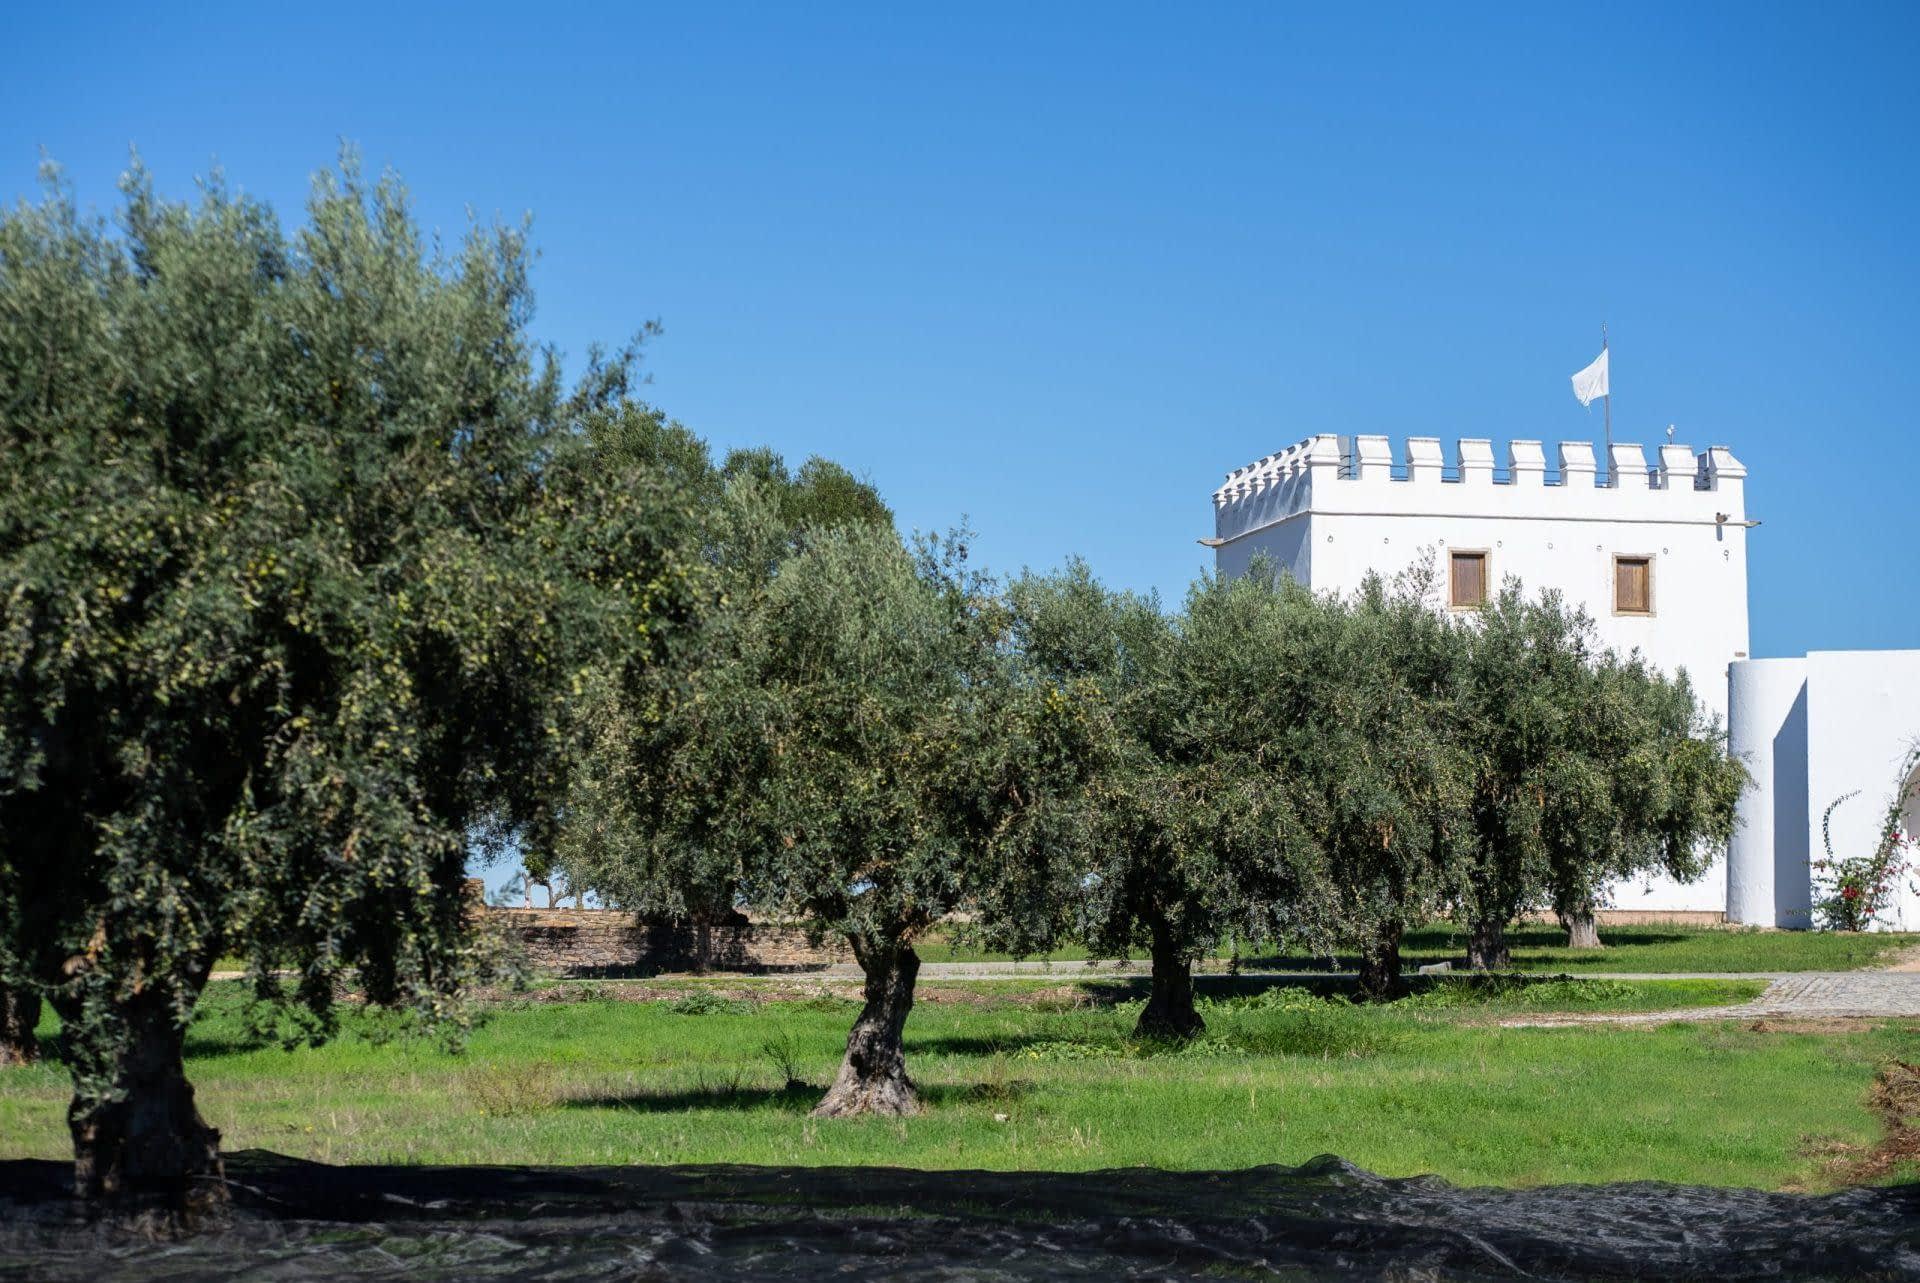 profiles-the-best-olive-oils-production-europe-esporao-celebrates-50th-anniversary-with-top-awards-for-organic-olive-oils-olive-oil-times